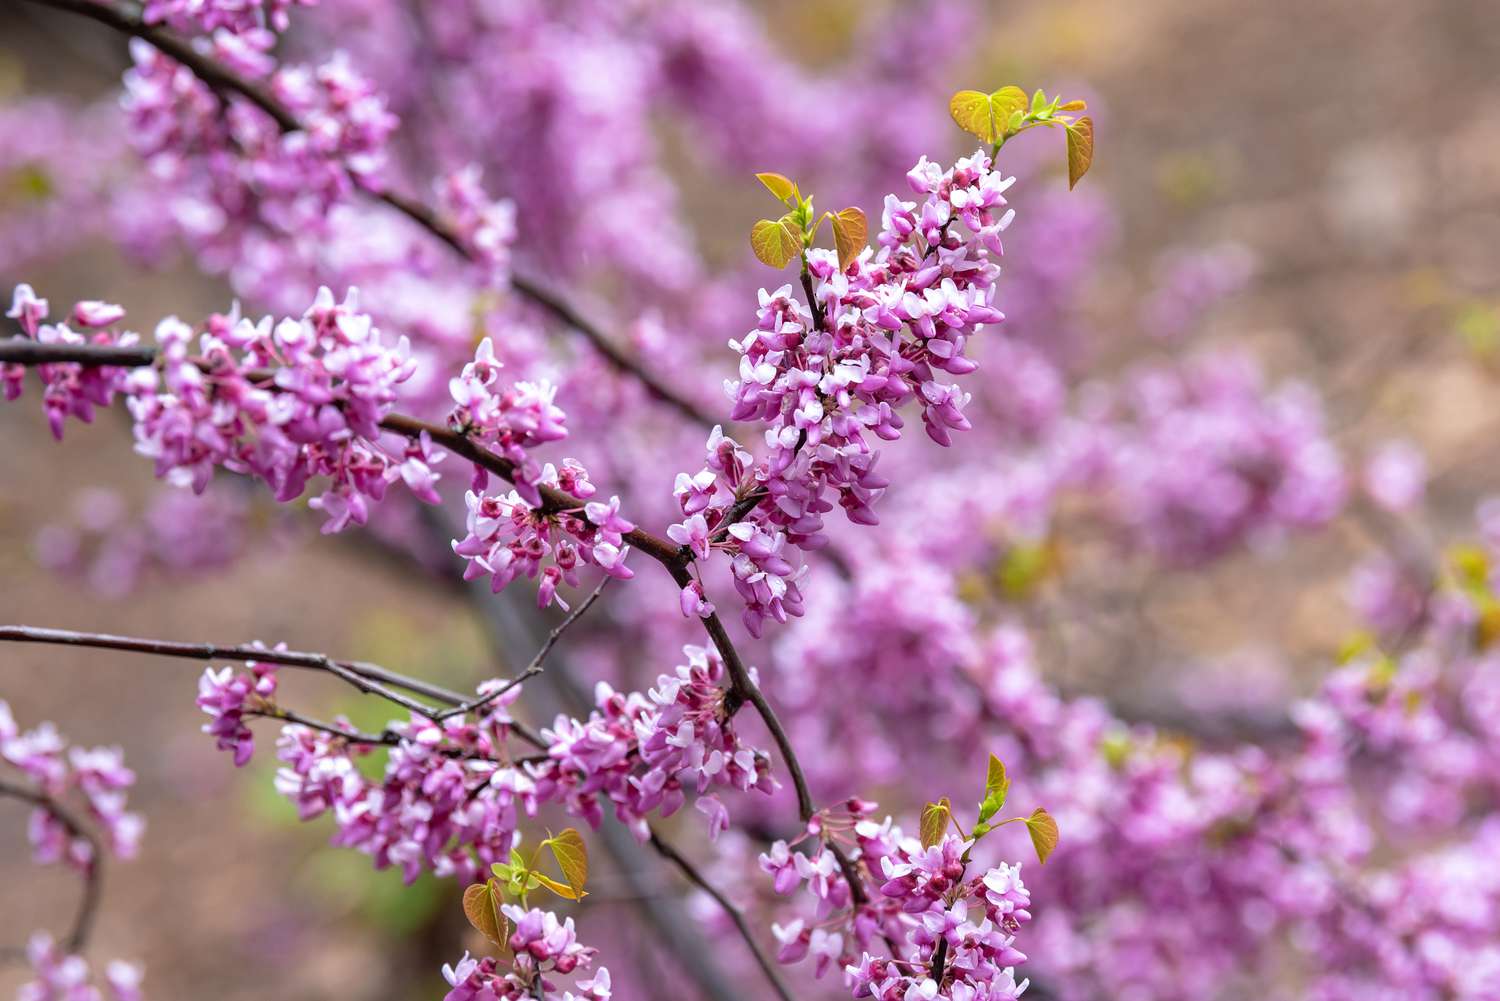 Forest pansy redbud tree branch with cluster of small pink flower buds and yellow-green leaves